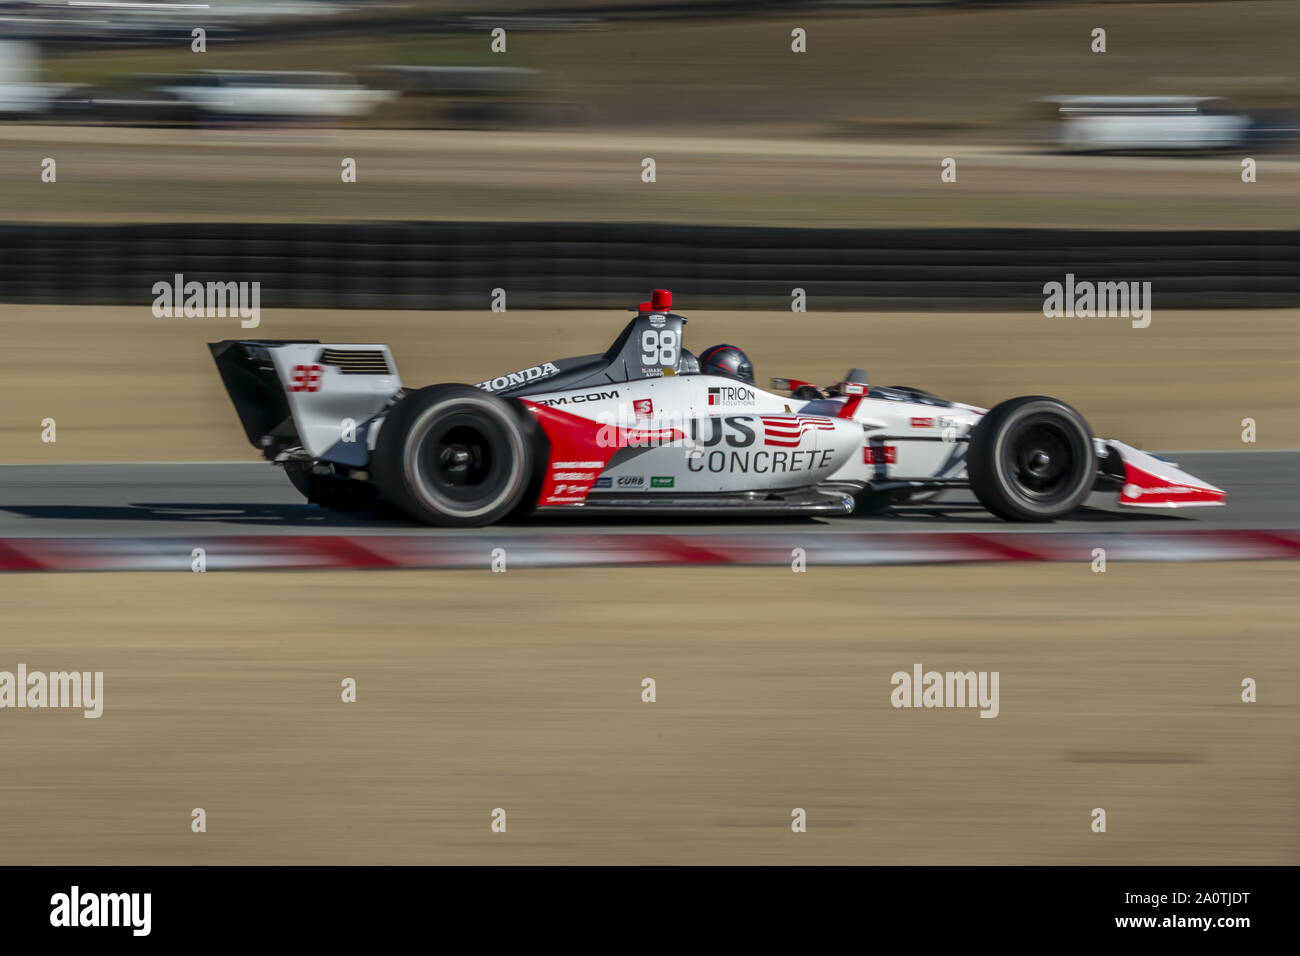 Salinas, California, USA. 21st Sep, 2019. MARCO Andretti (98) of the United States practices for the Firestone Grand Prix of Monterey at Weathertech Raceway Laguna Seca in Salinas, California. (Credit Image: © Walter G Arce Sr Grindstone Medi/ASP) Stock Photo